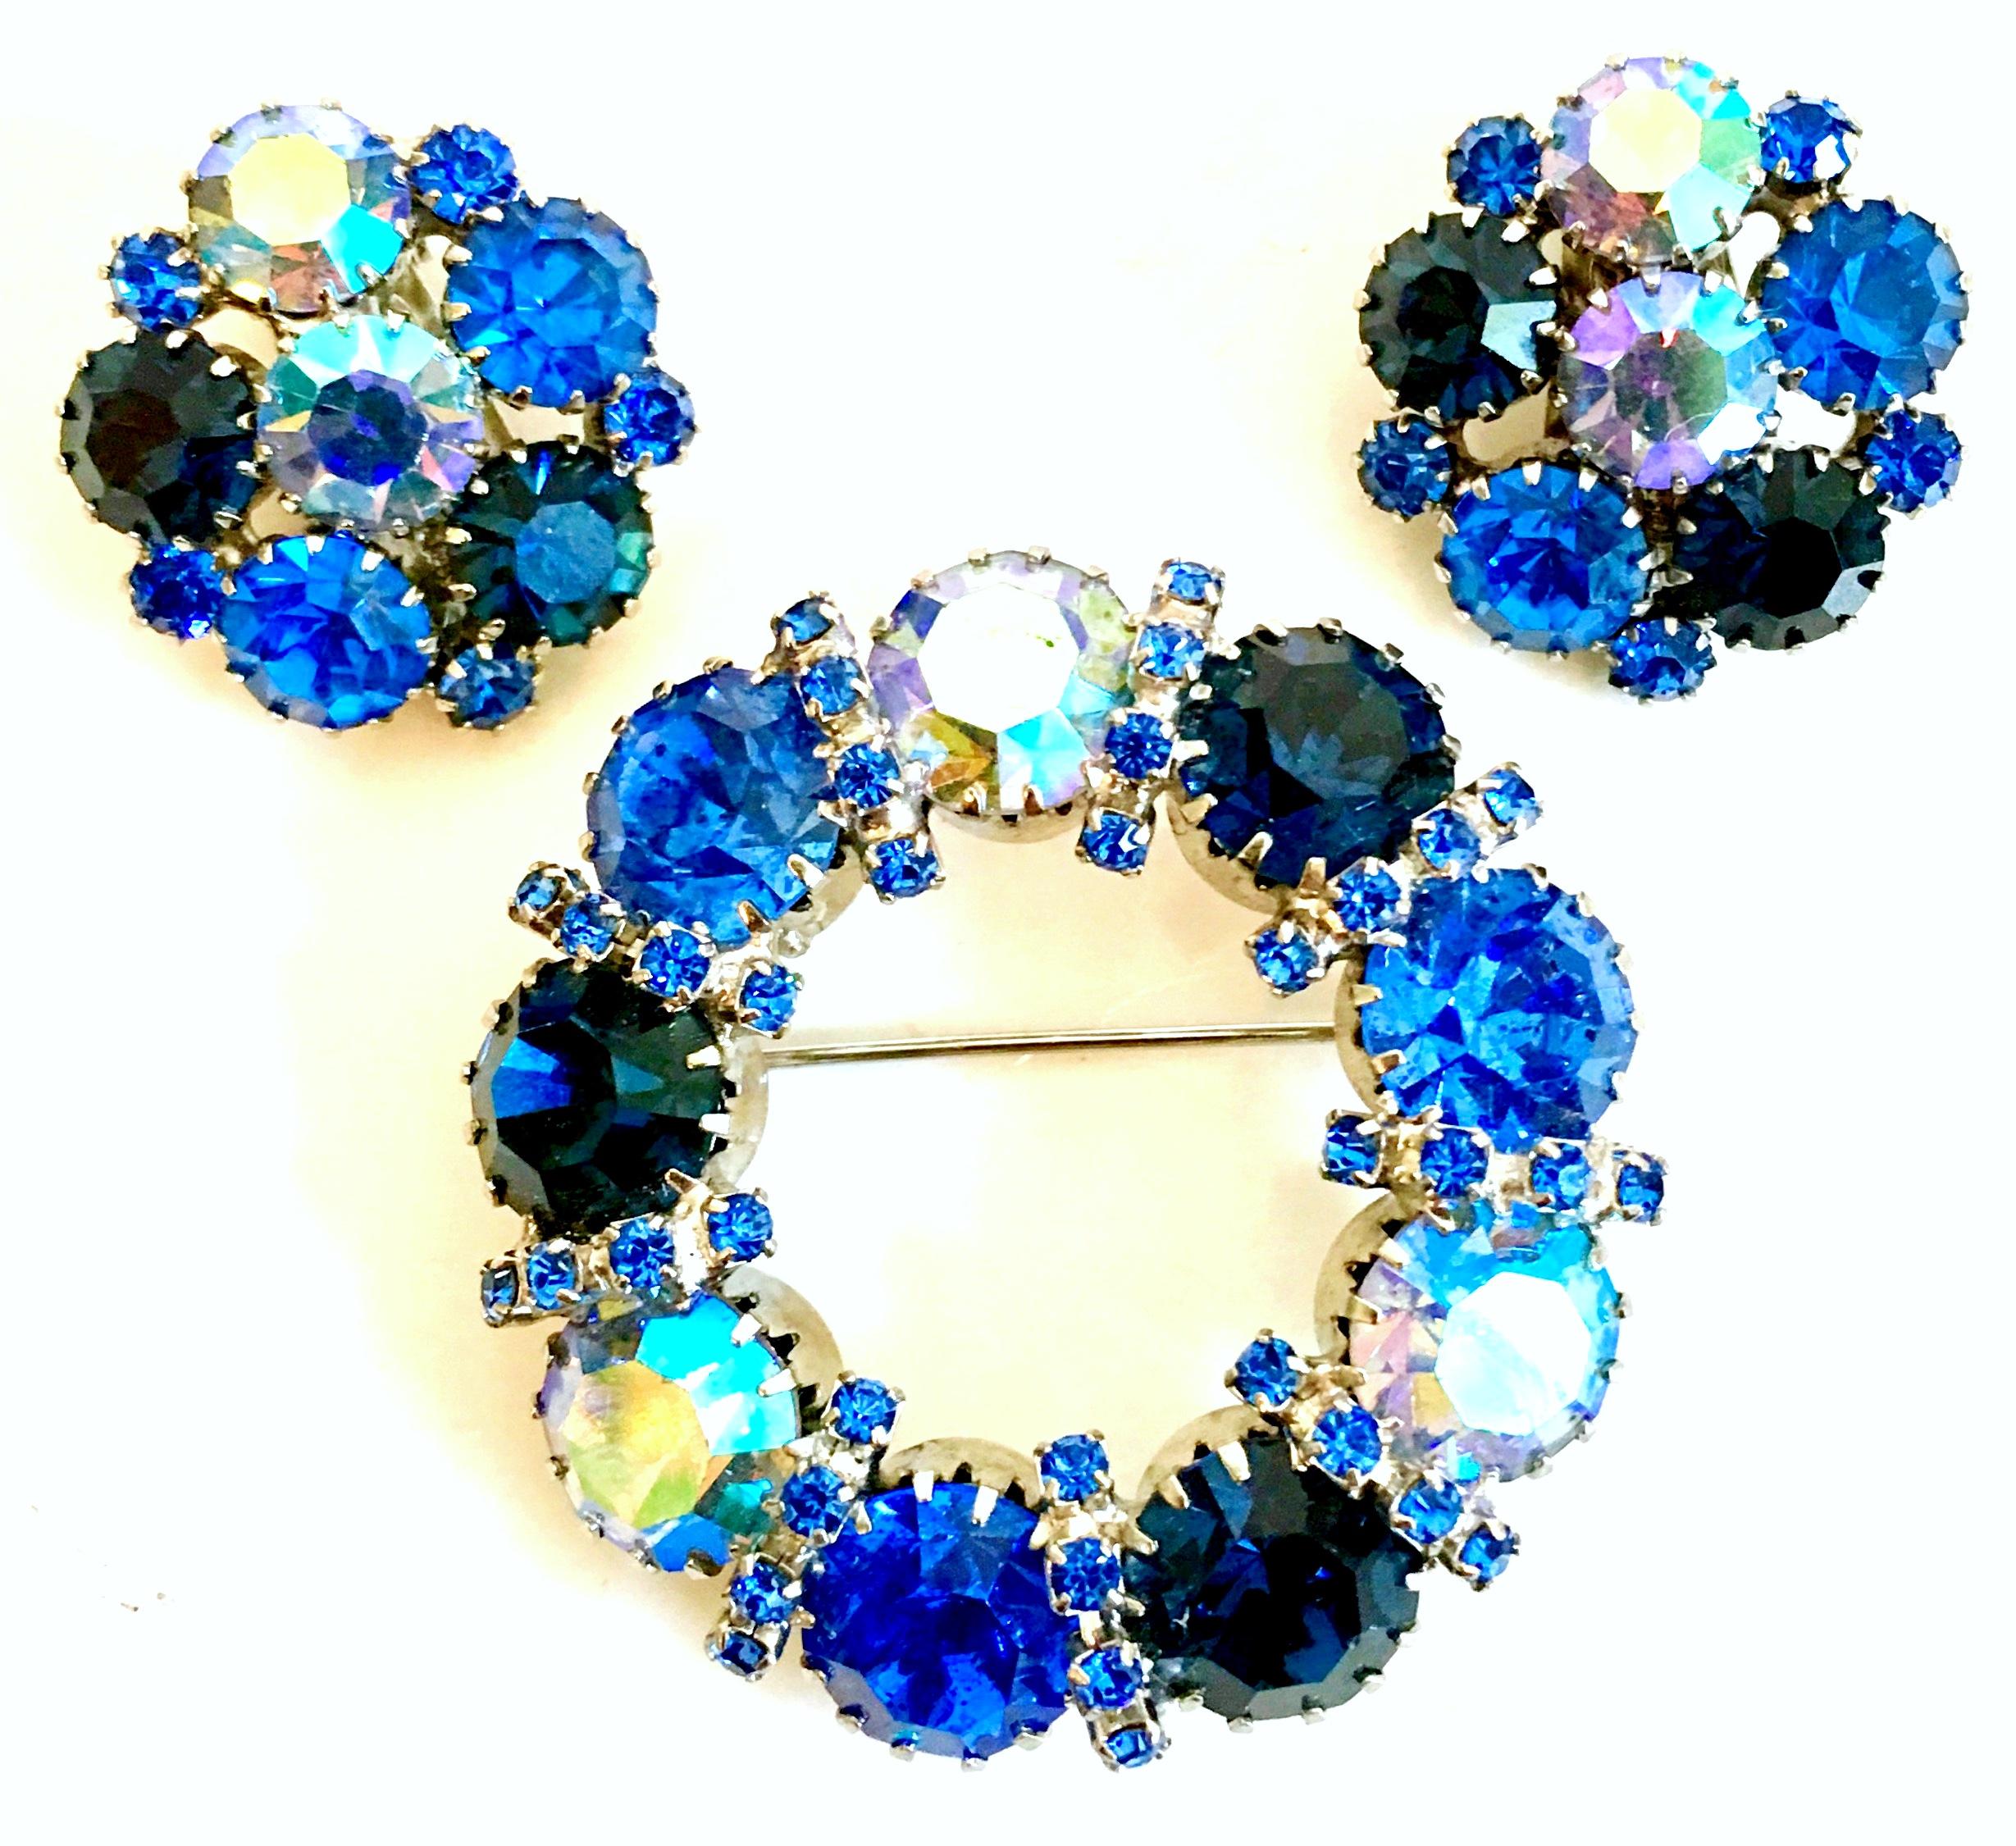 1960'S Weiss Style Silver & Swarovski Crystal Rhinestone Brooch & Earrings Set Of Three Pieces. Features rhodium plate silver with brilliant Blue Sapphire and Aurora Borealis cut and faceted dog tooth prong set stones. The clip style earrings